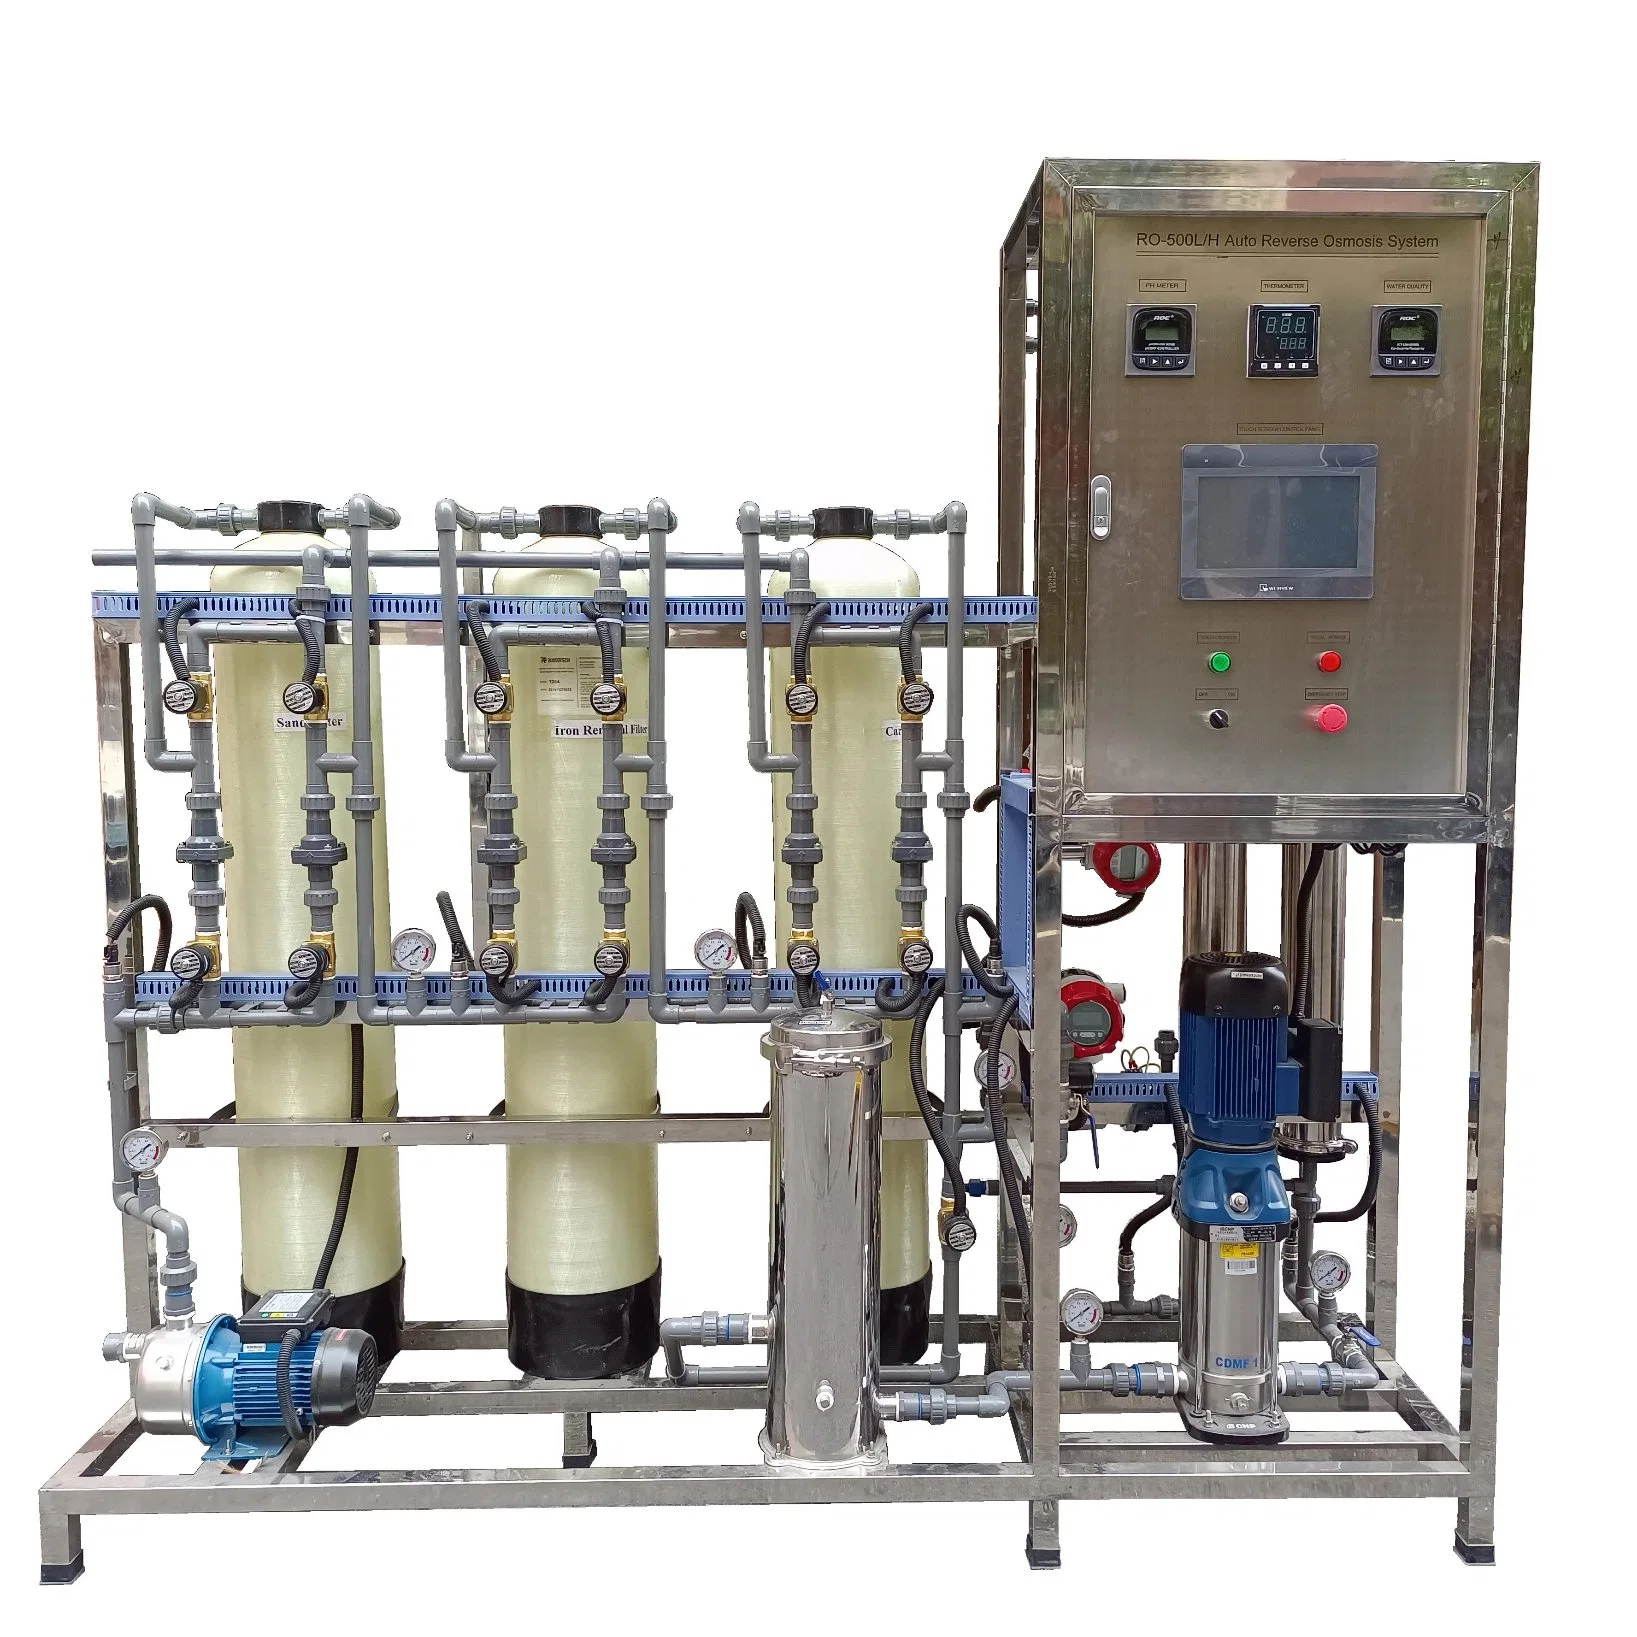 RO-500L/H Auto PLC Control Reverse Osmosis Water Filter Purification Purifier System Industrial Desalination Plant with pH Meter